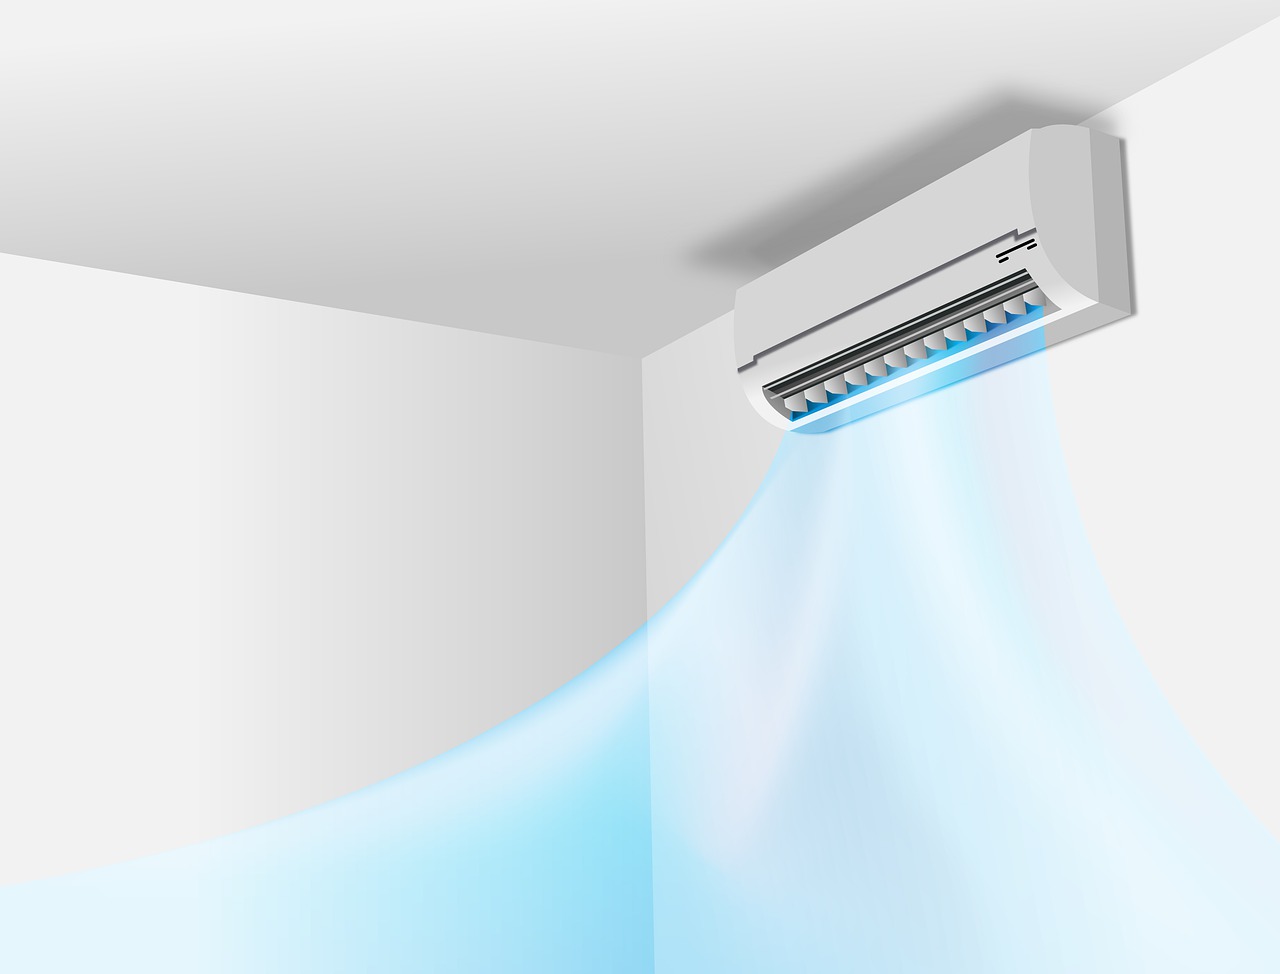 Discover the new multi-split air conditioning